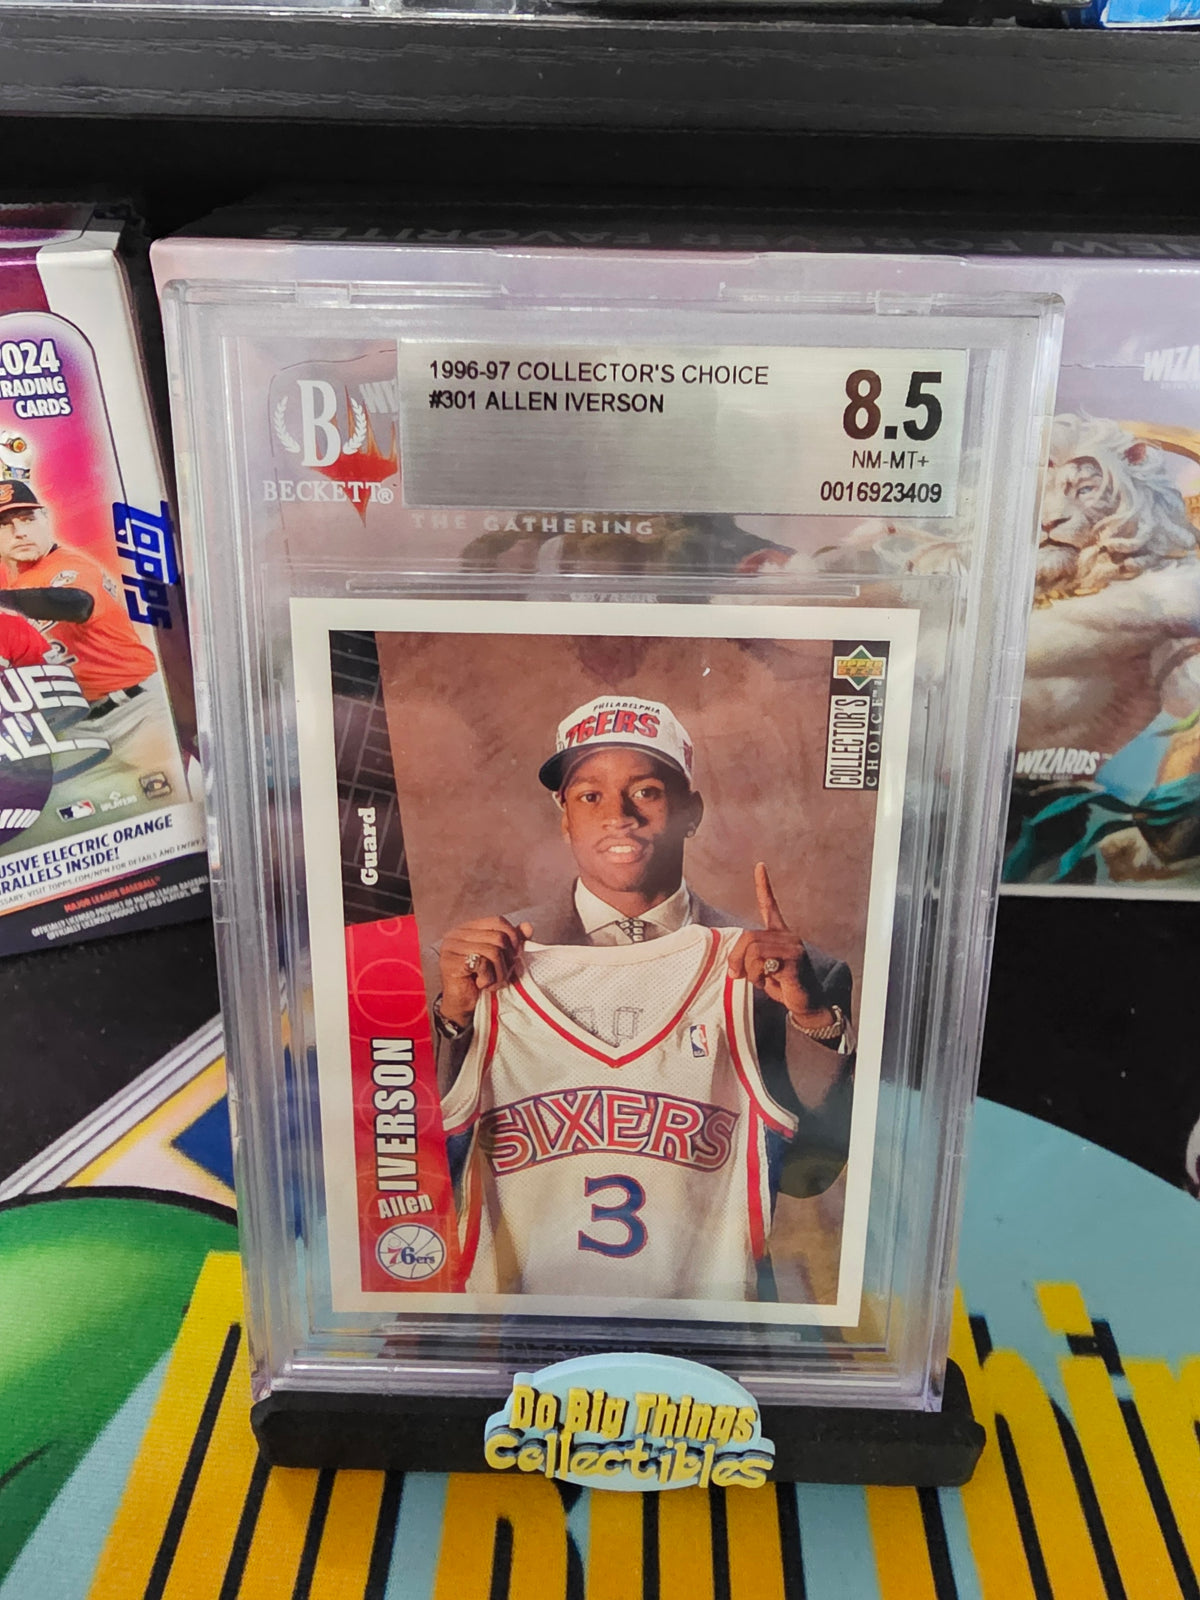 1996-97 Collector's Choice Allen Iverson RC BGS 8.5